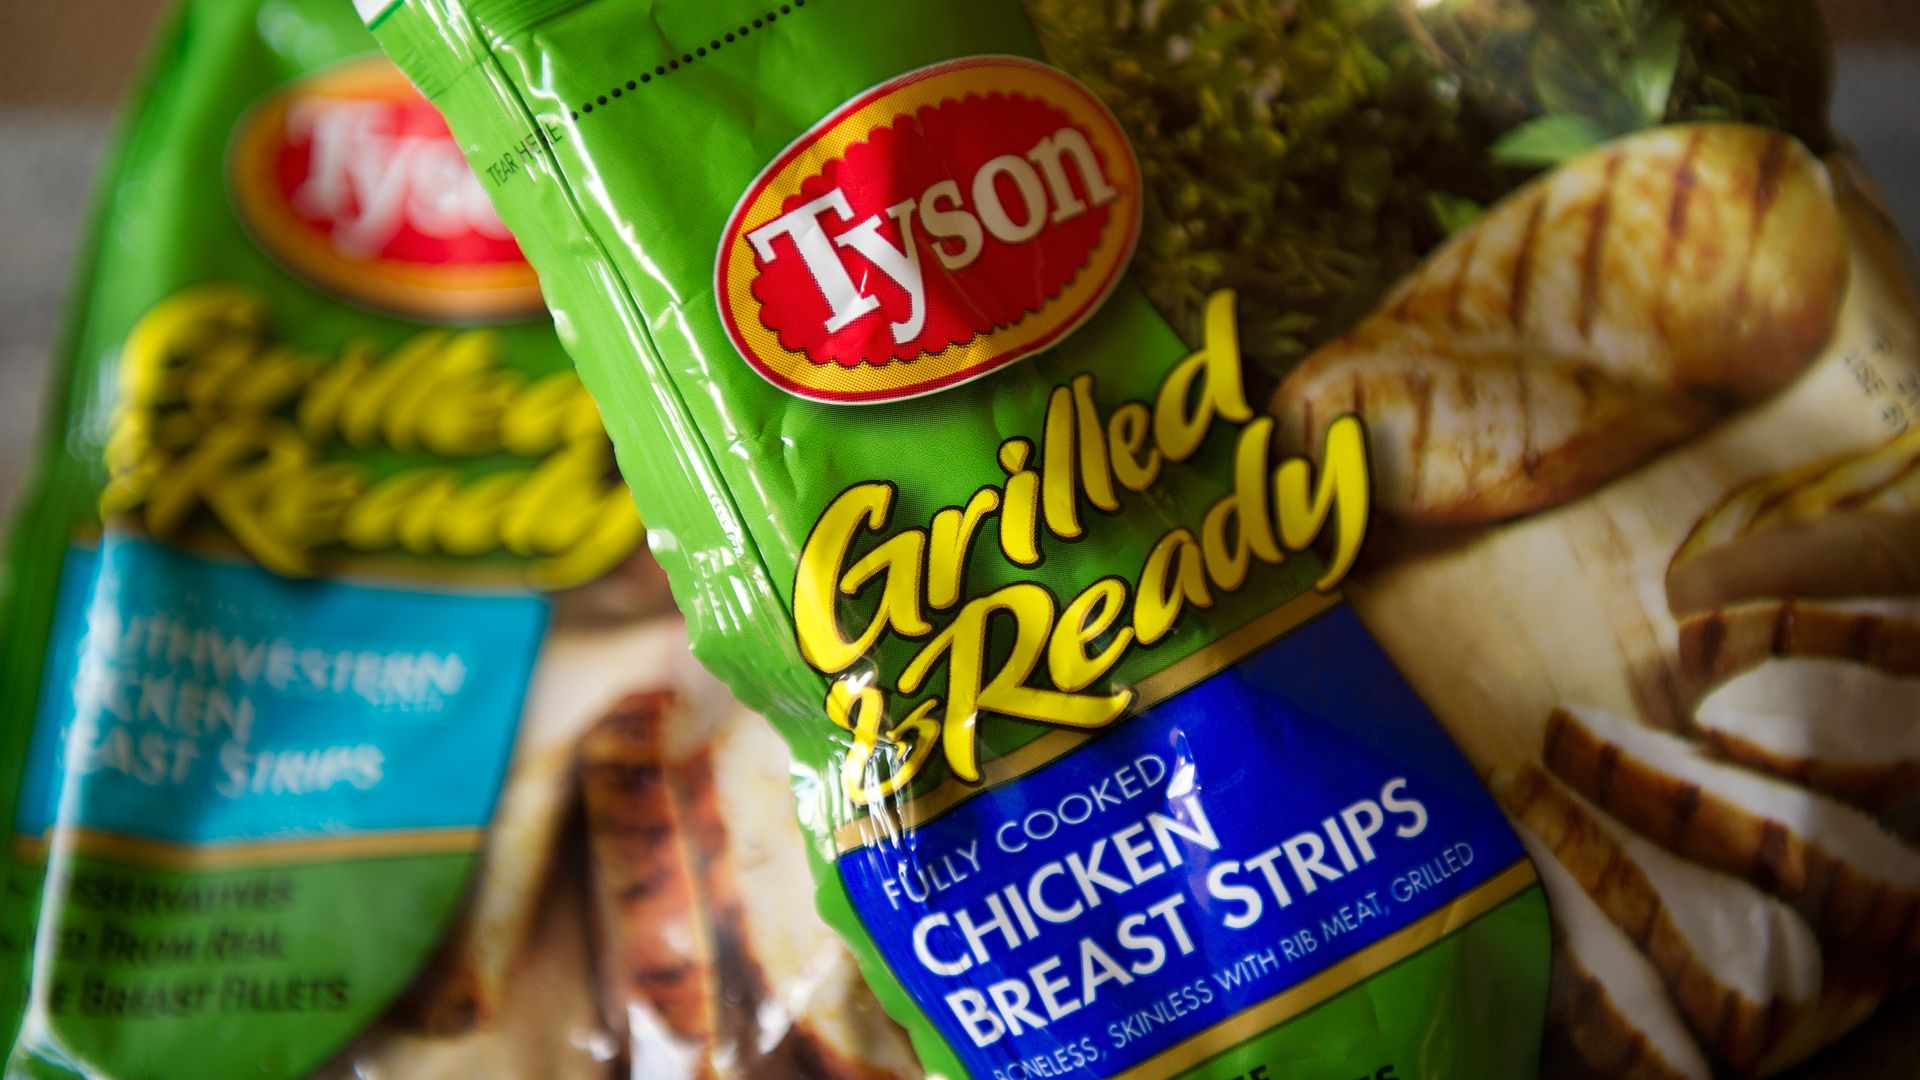 Packages of Tyson Foods Inc. chicken breast strips are arranged for a photograph in San Francisco, California, U.S., on Friday, July 29, 2011.